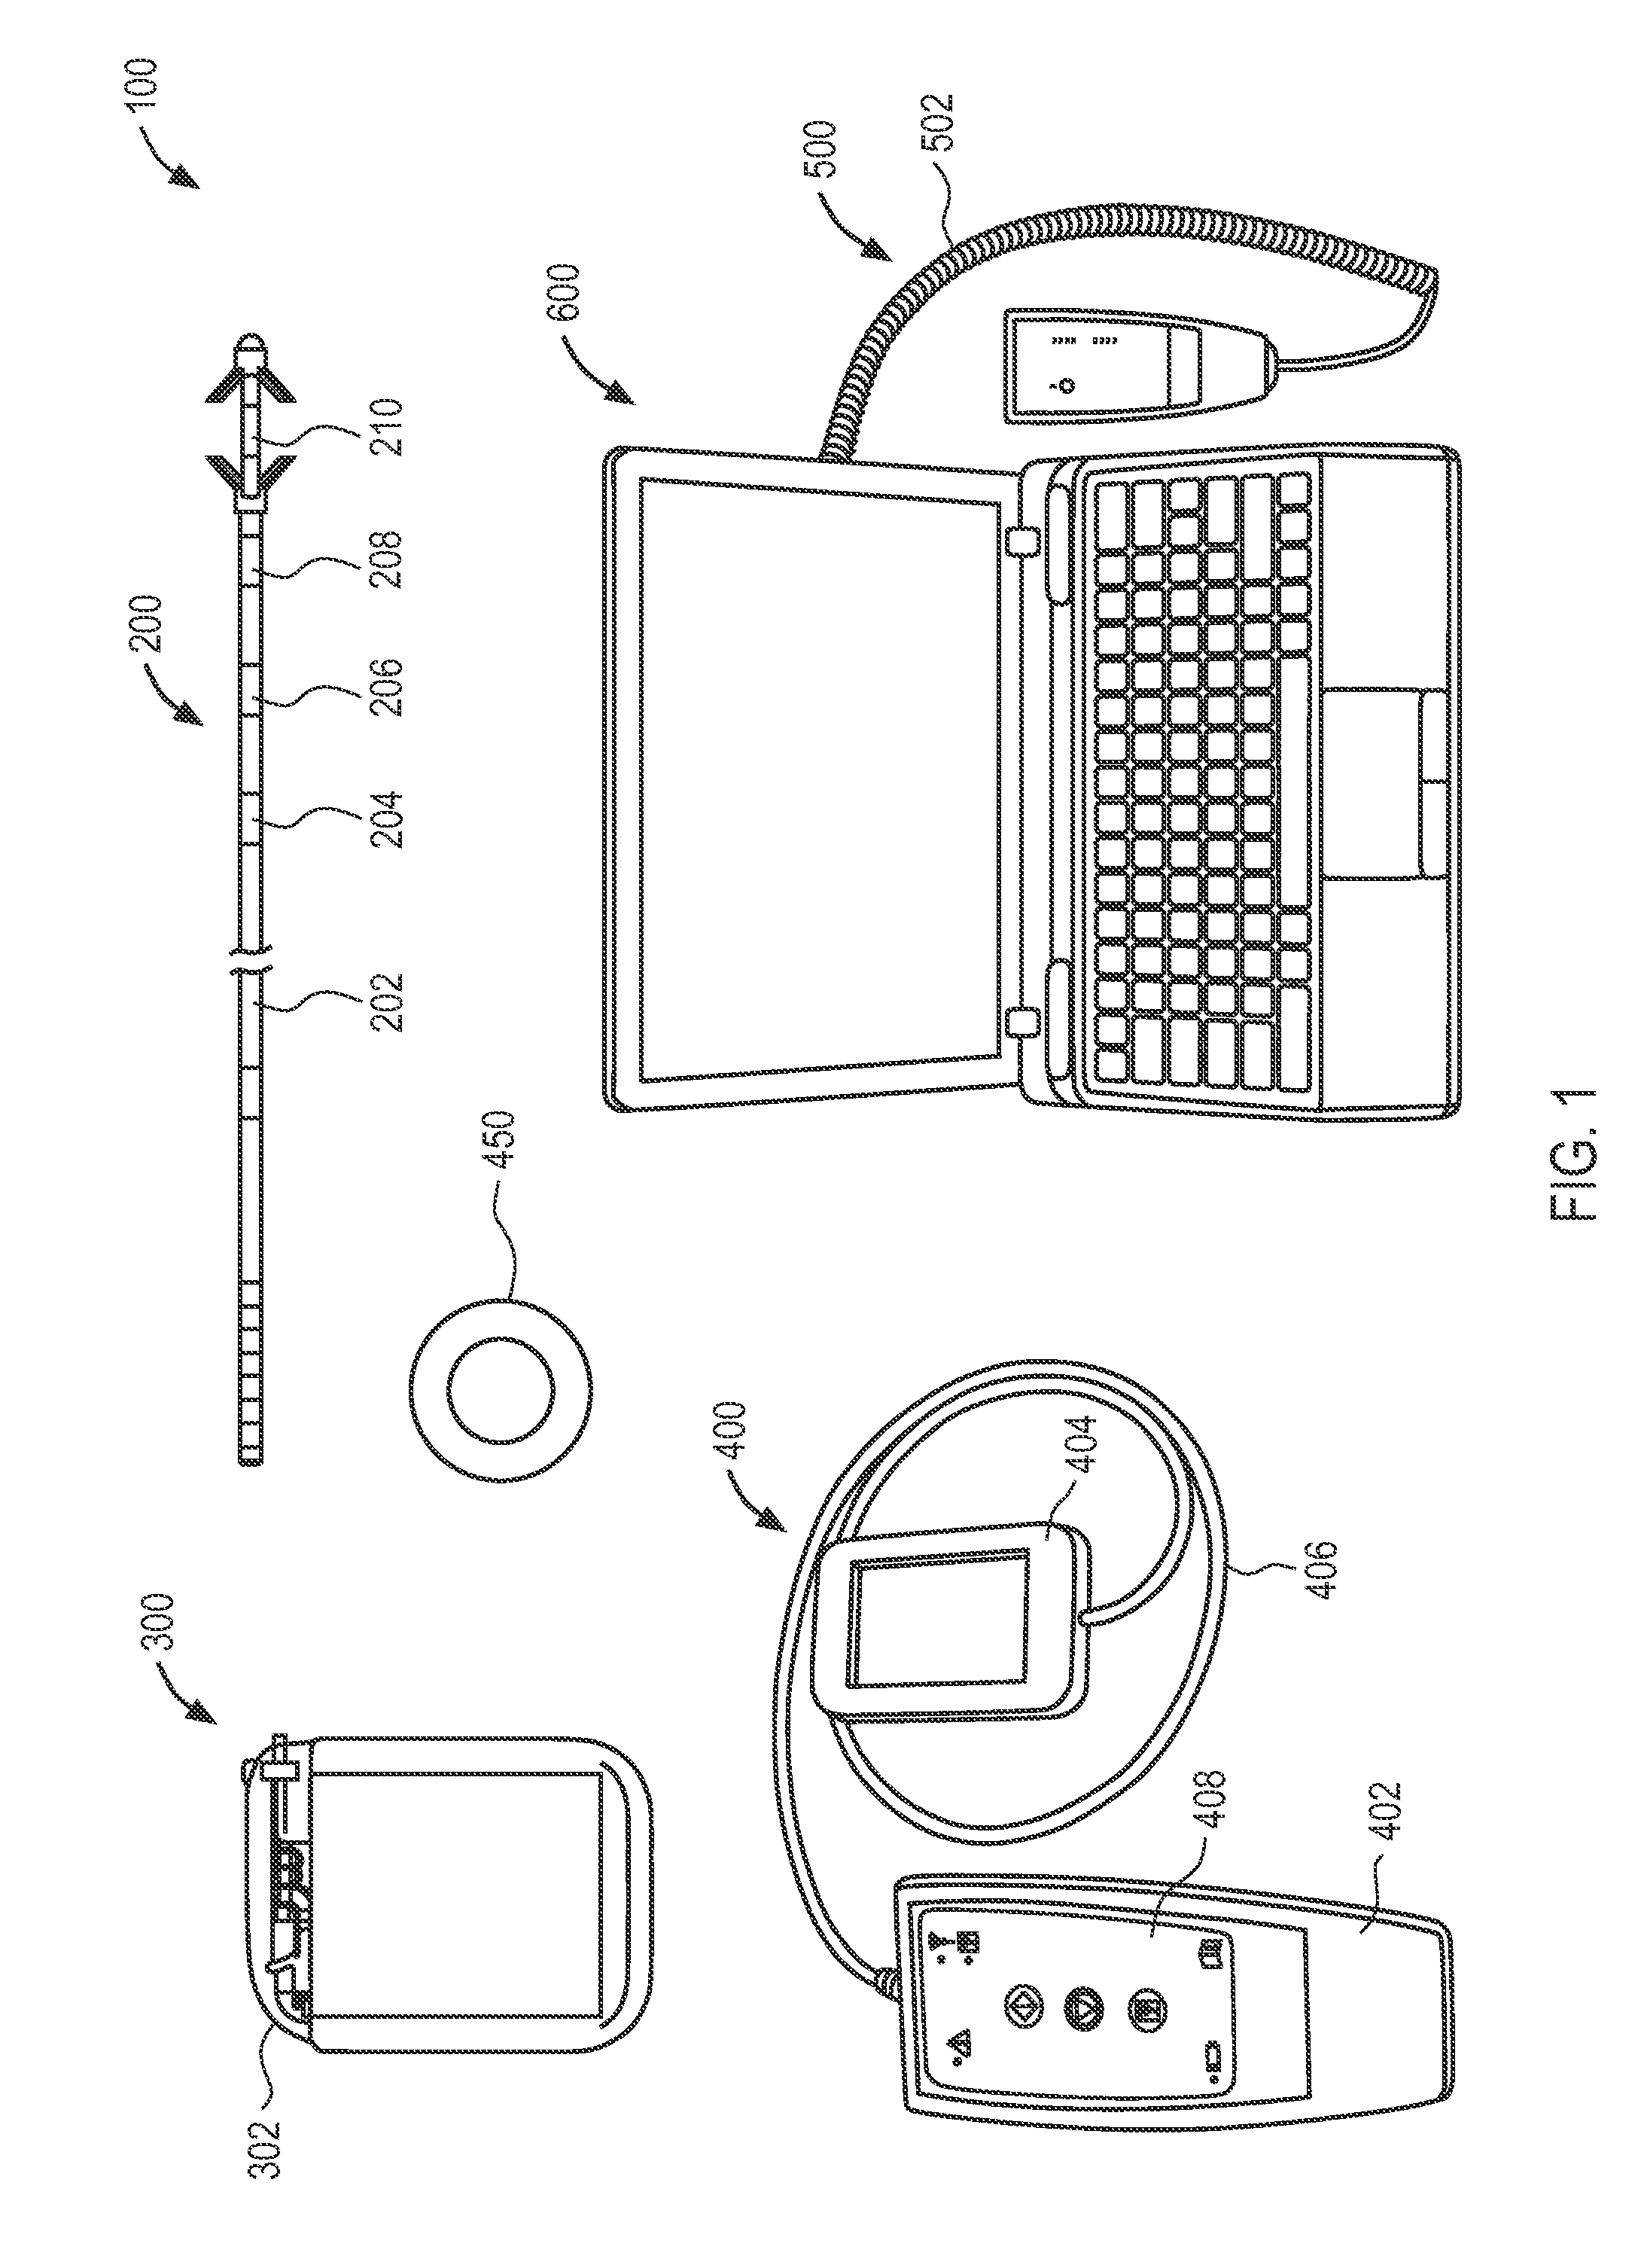 Systems and methods for implanting electrode leads for use with implantable neuromuscular electrical stimulator